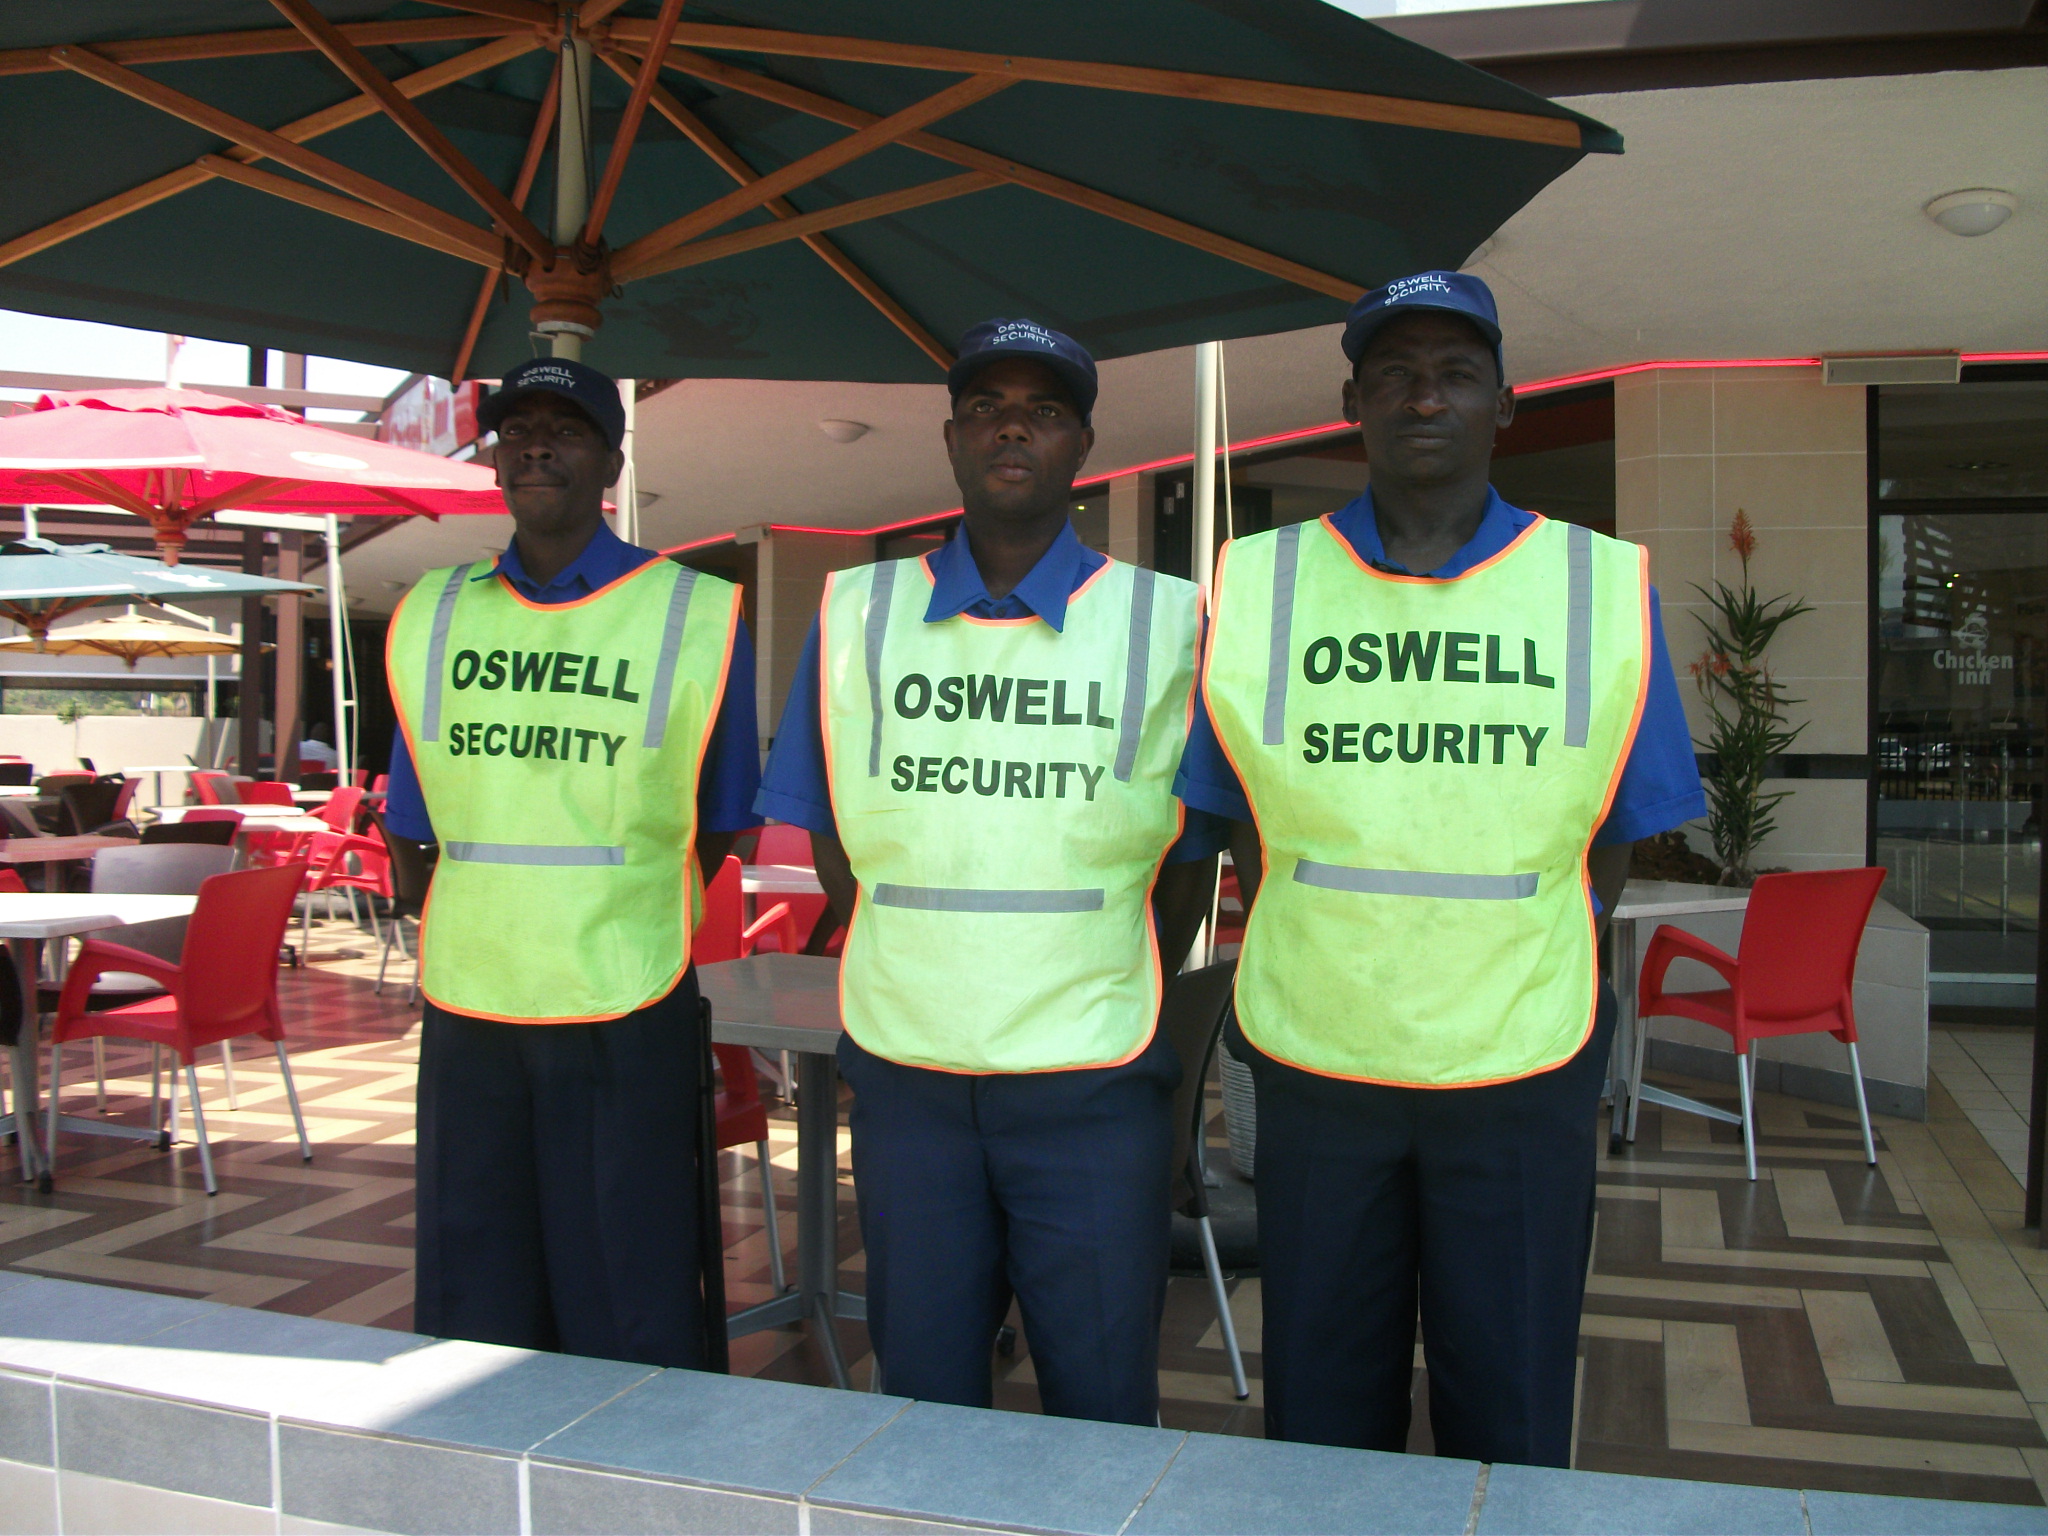 Oswell Security officers on duty